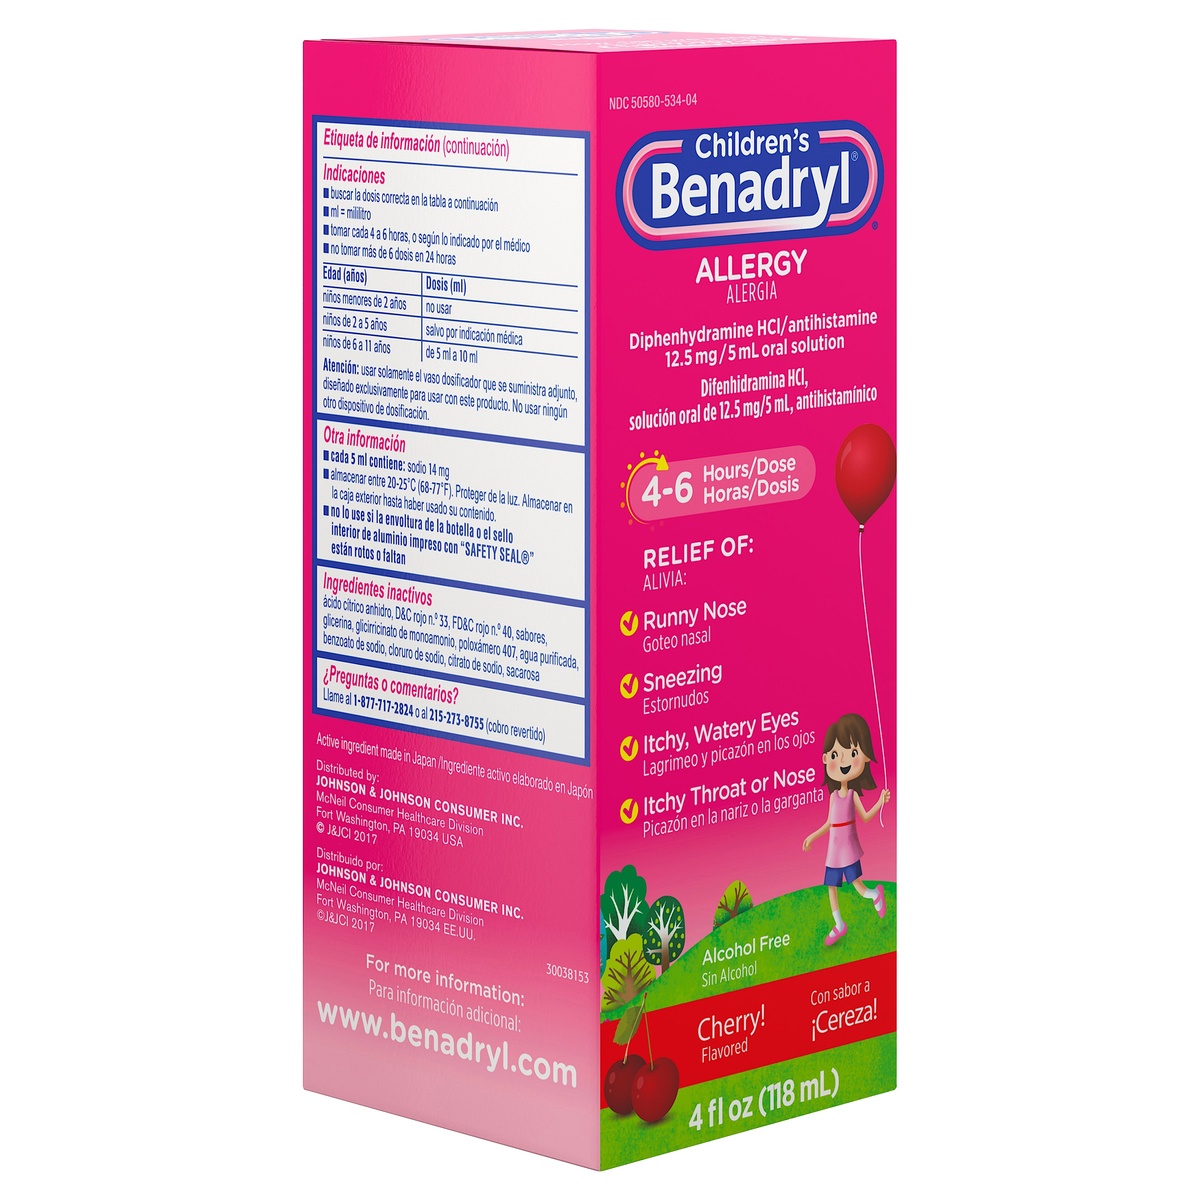 slide 2 of 5, Children's Benadryl Allergy Relief Liquid Medicine with Diphenhydramine HCl, Kids' Allergy Syrup for Allergy Symptoms Like Runny Nose, Itchy Eyes & More, Cherry Flavor, 4 fl oz